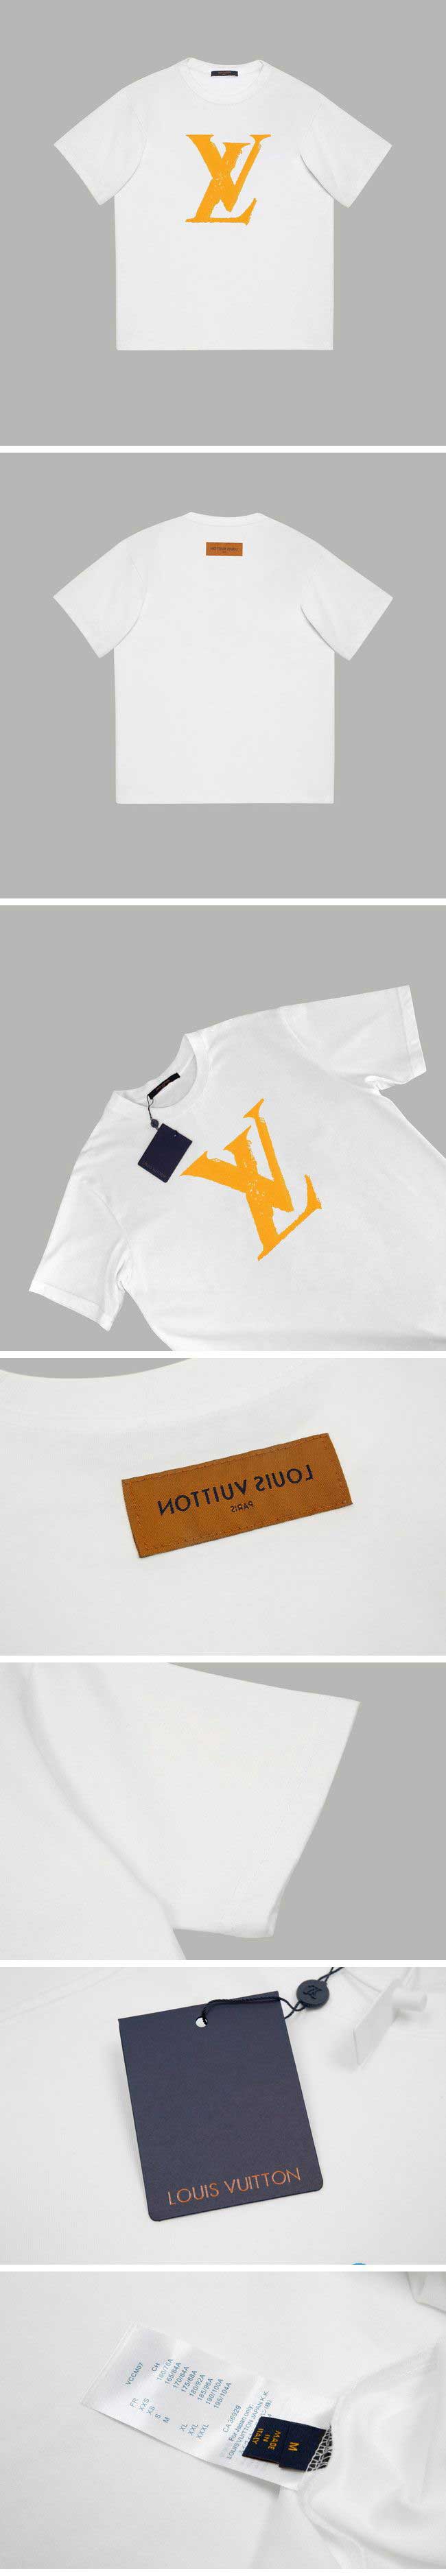 Louis Vuitton Graphic LV Print Tee ルイヴィトン グラフィック LV プリント Tシャツ ホワイト